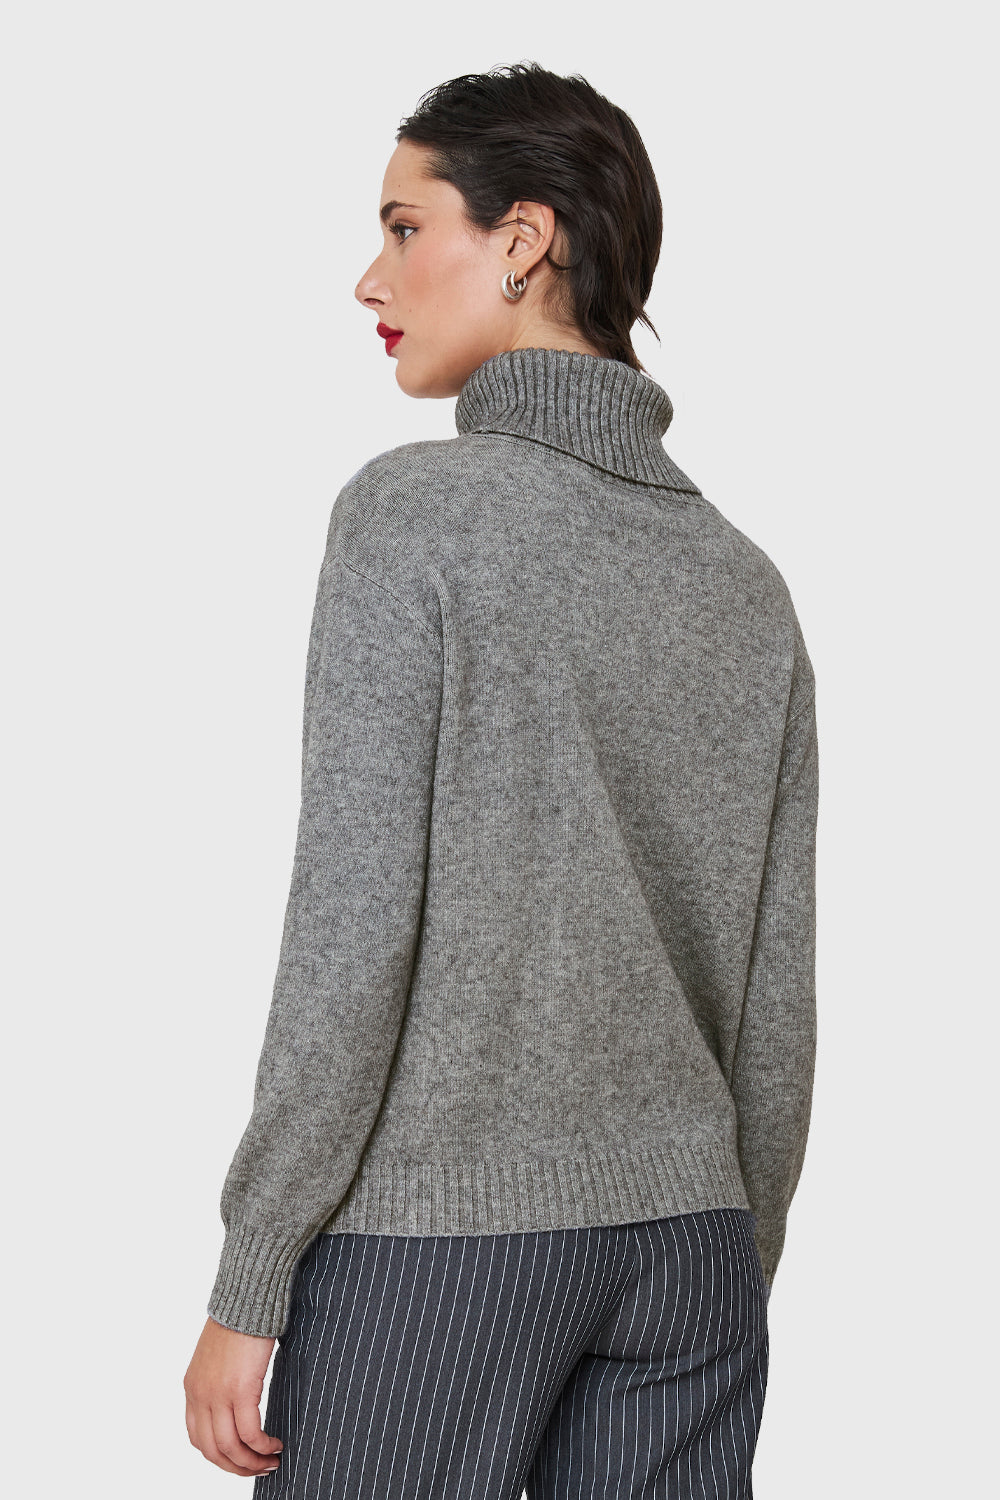 Sweater Beatle Strass Gris